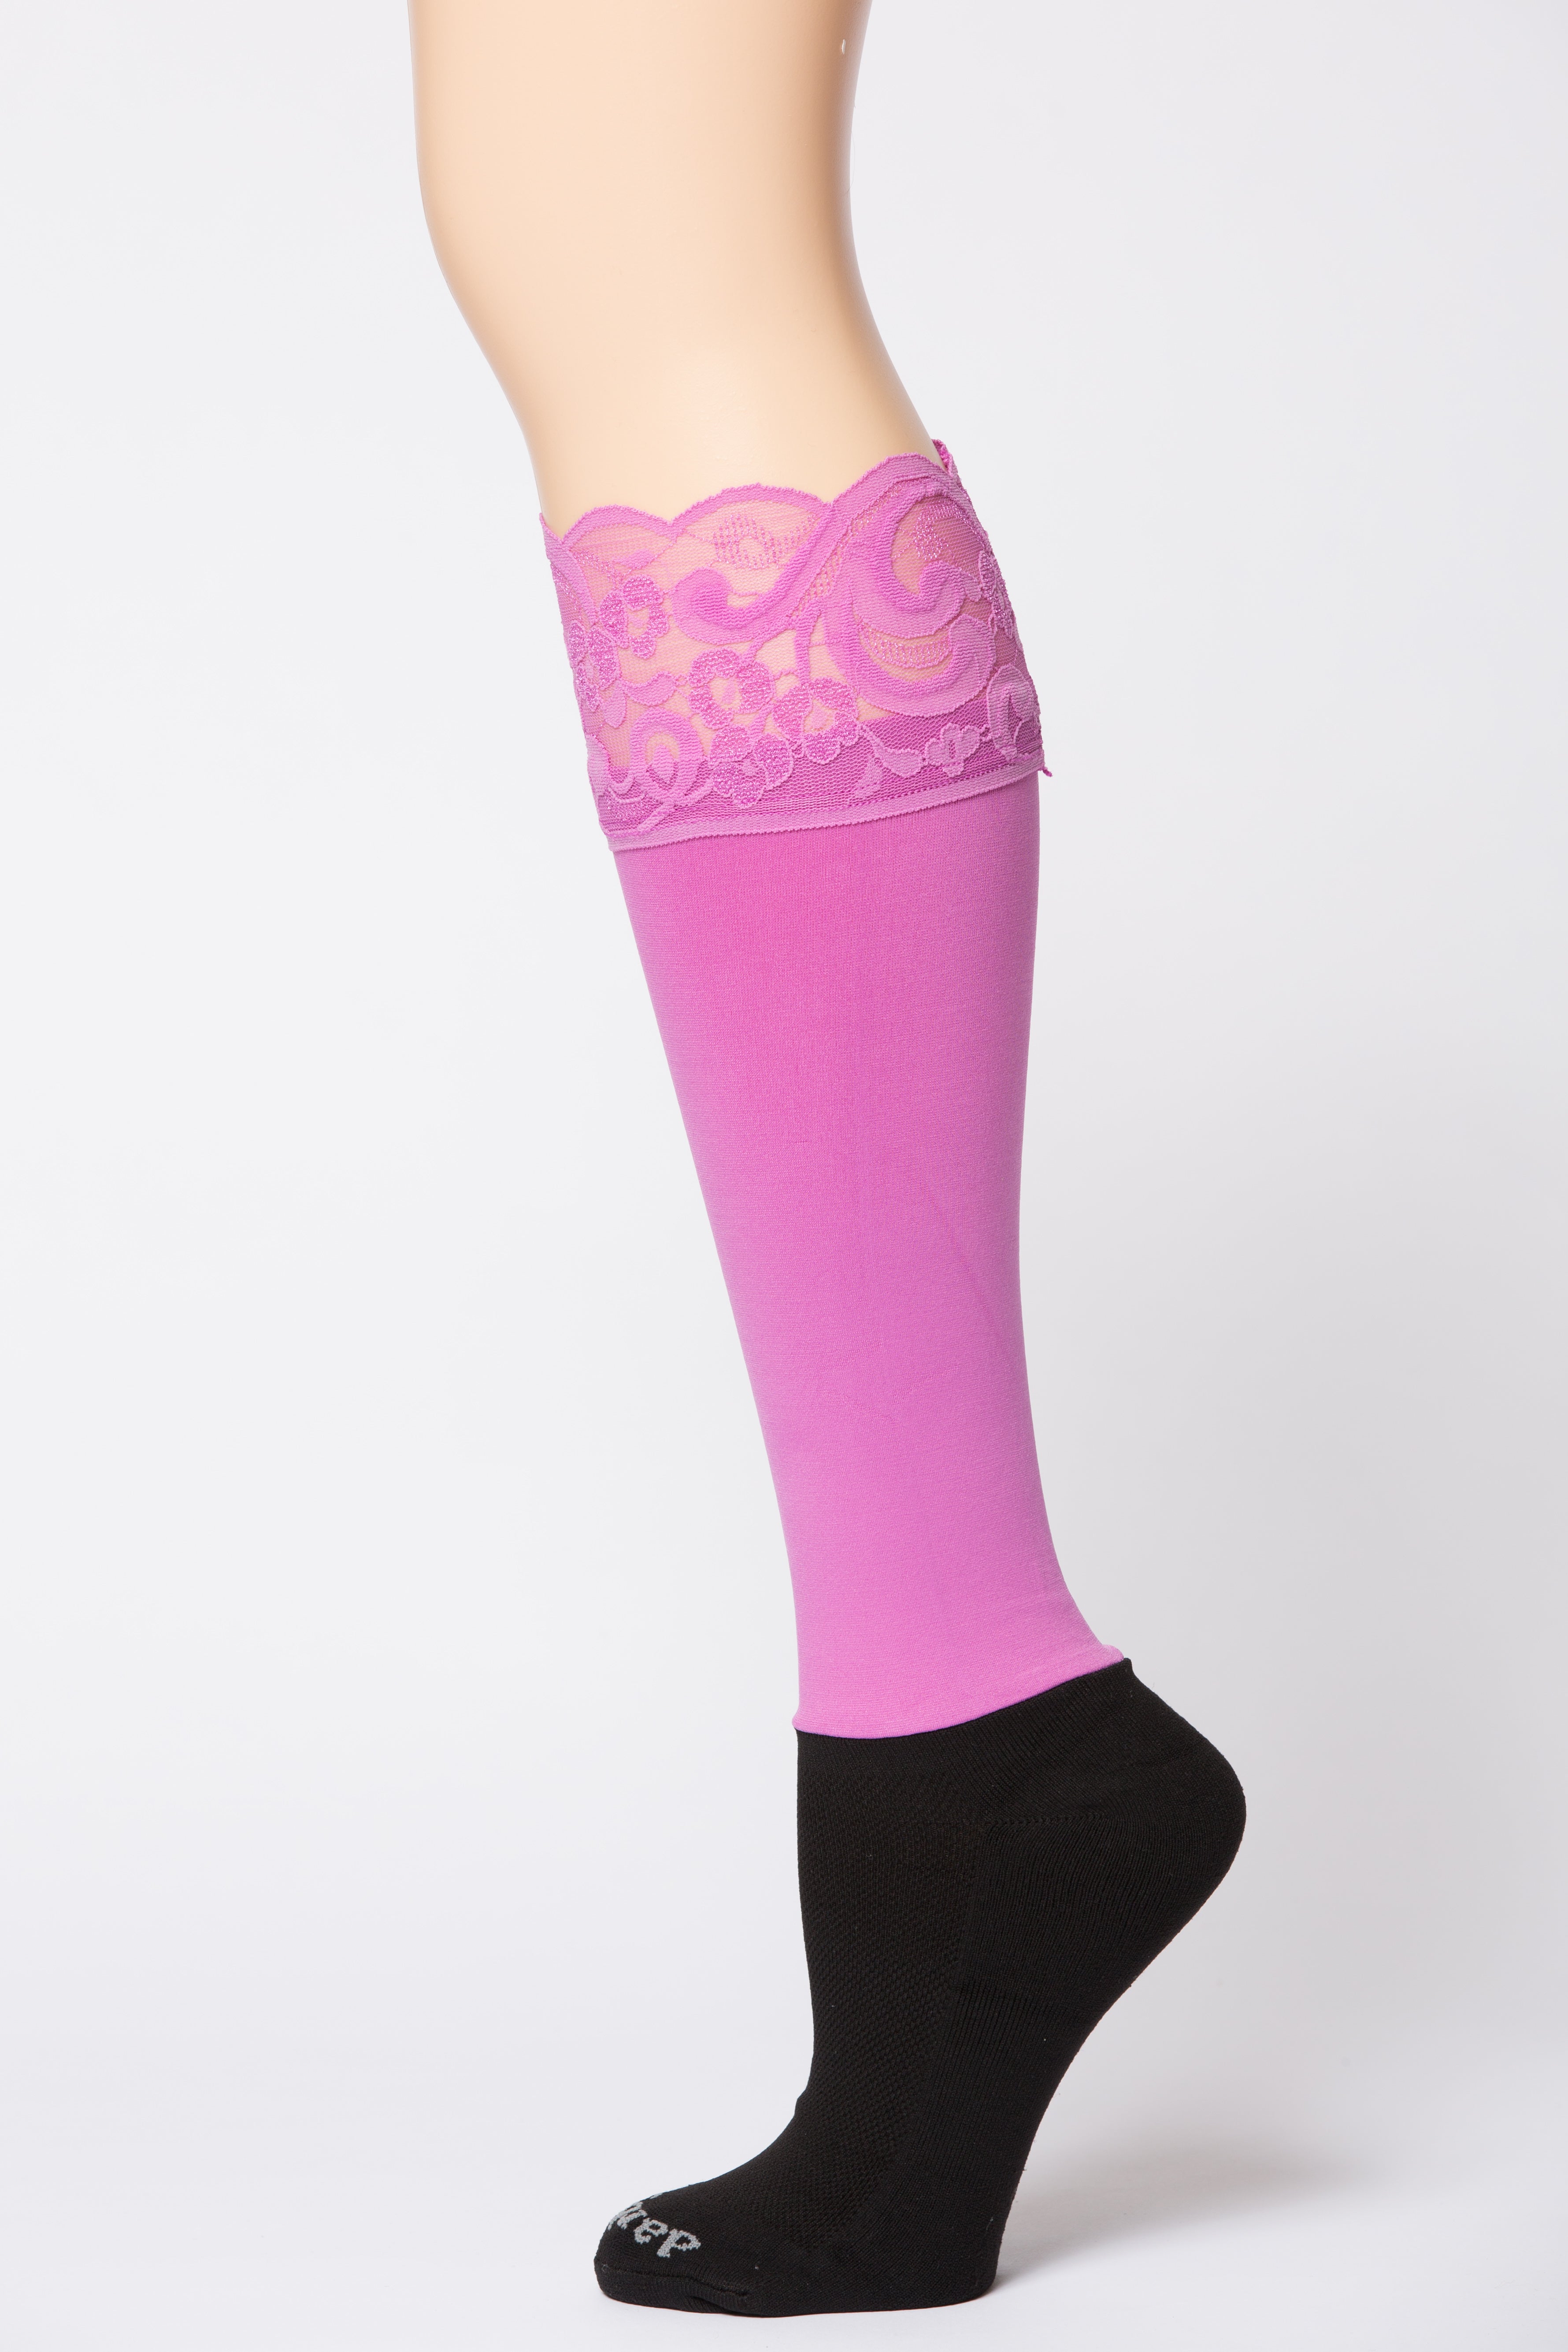 Lacy Slouch Socks  Accessories, Hosiery :Beautiful Designs by